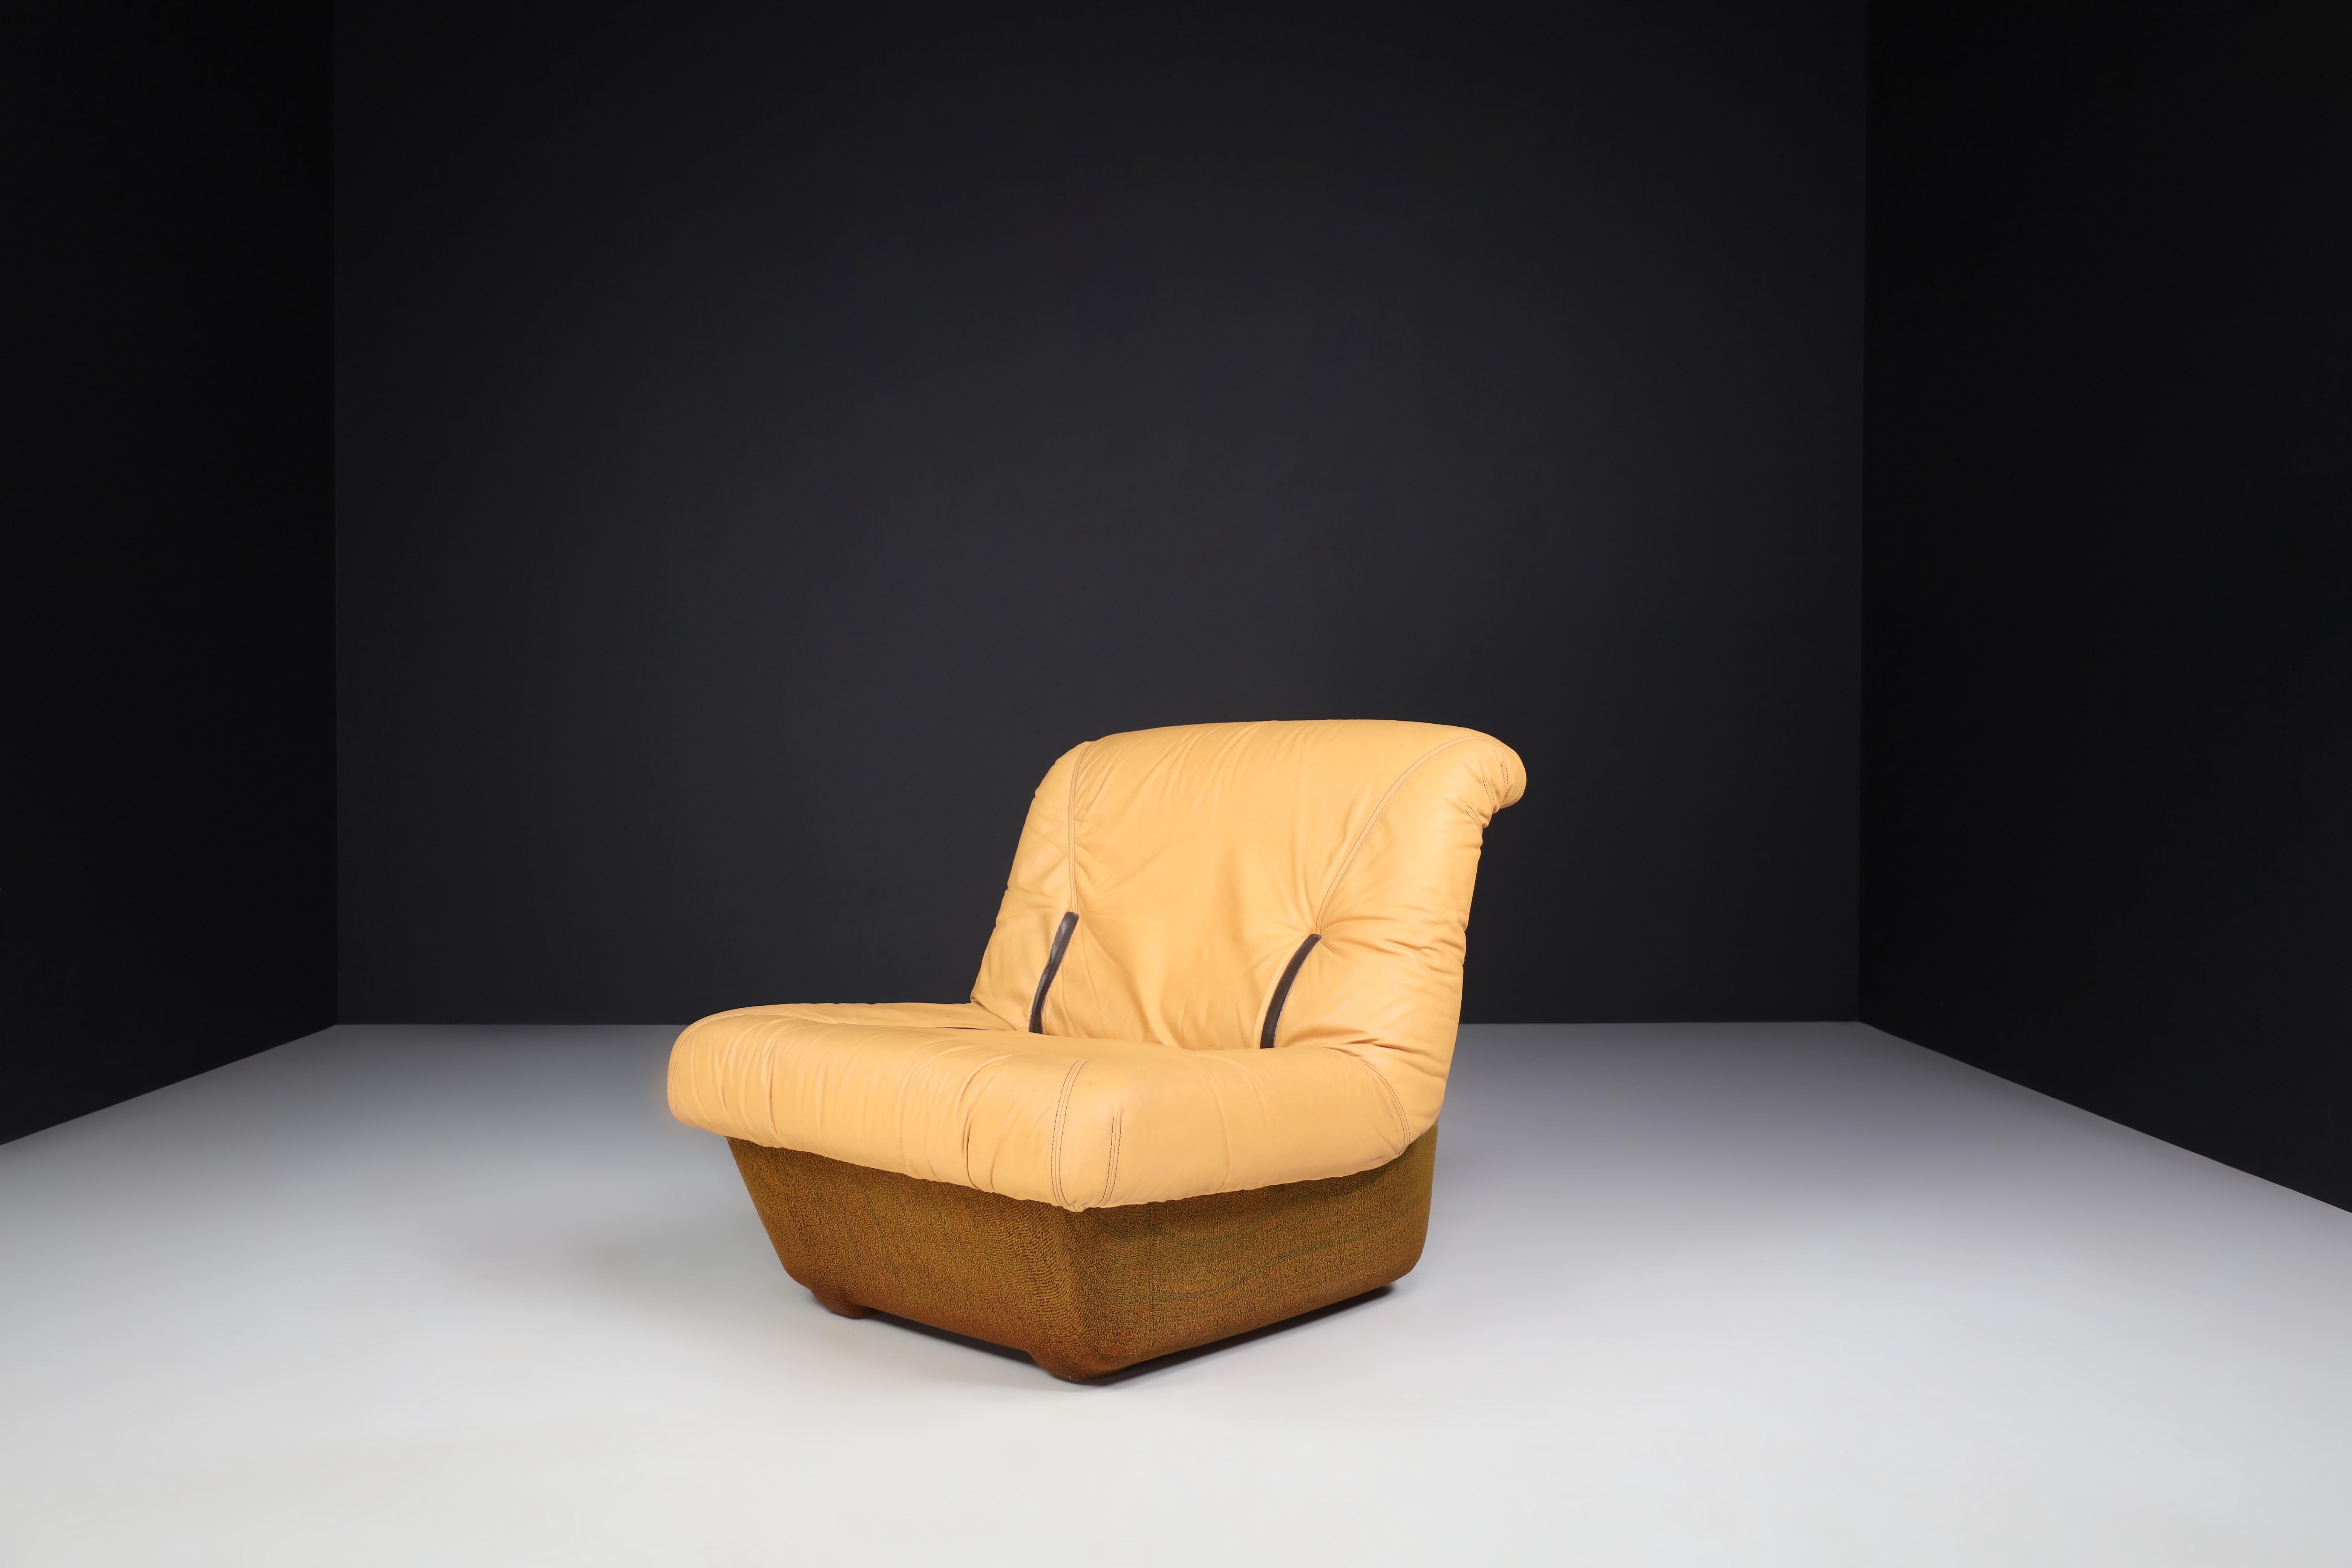 Modern leather lounge chairs by Lev & Lev, Italy 1970s

Lounge chairs Made by Lev & Lev Italy circa 1970, beautifully proportioned with brown upholstered bases and backs, with seat and front back support upholstered in creme/beige leather. These